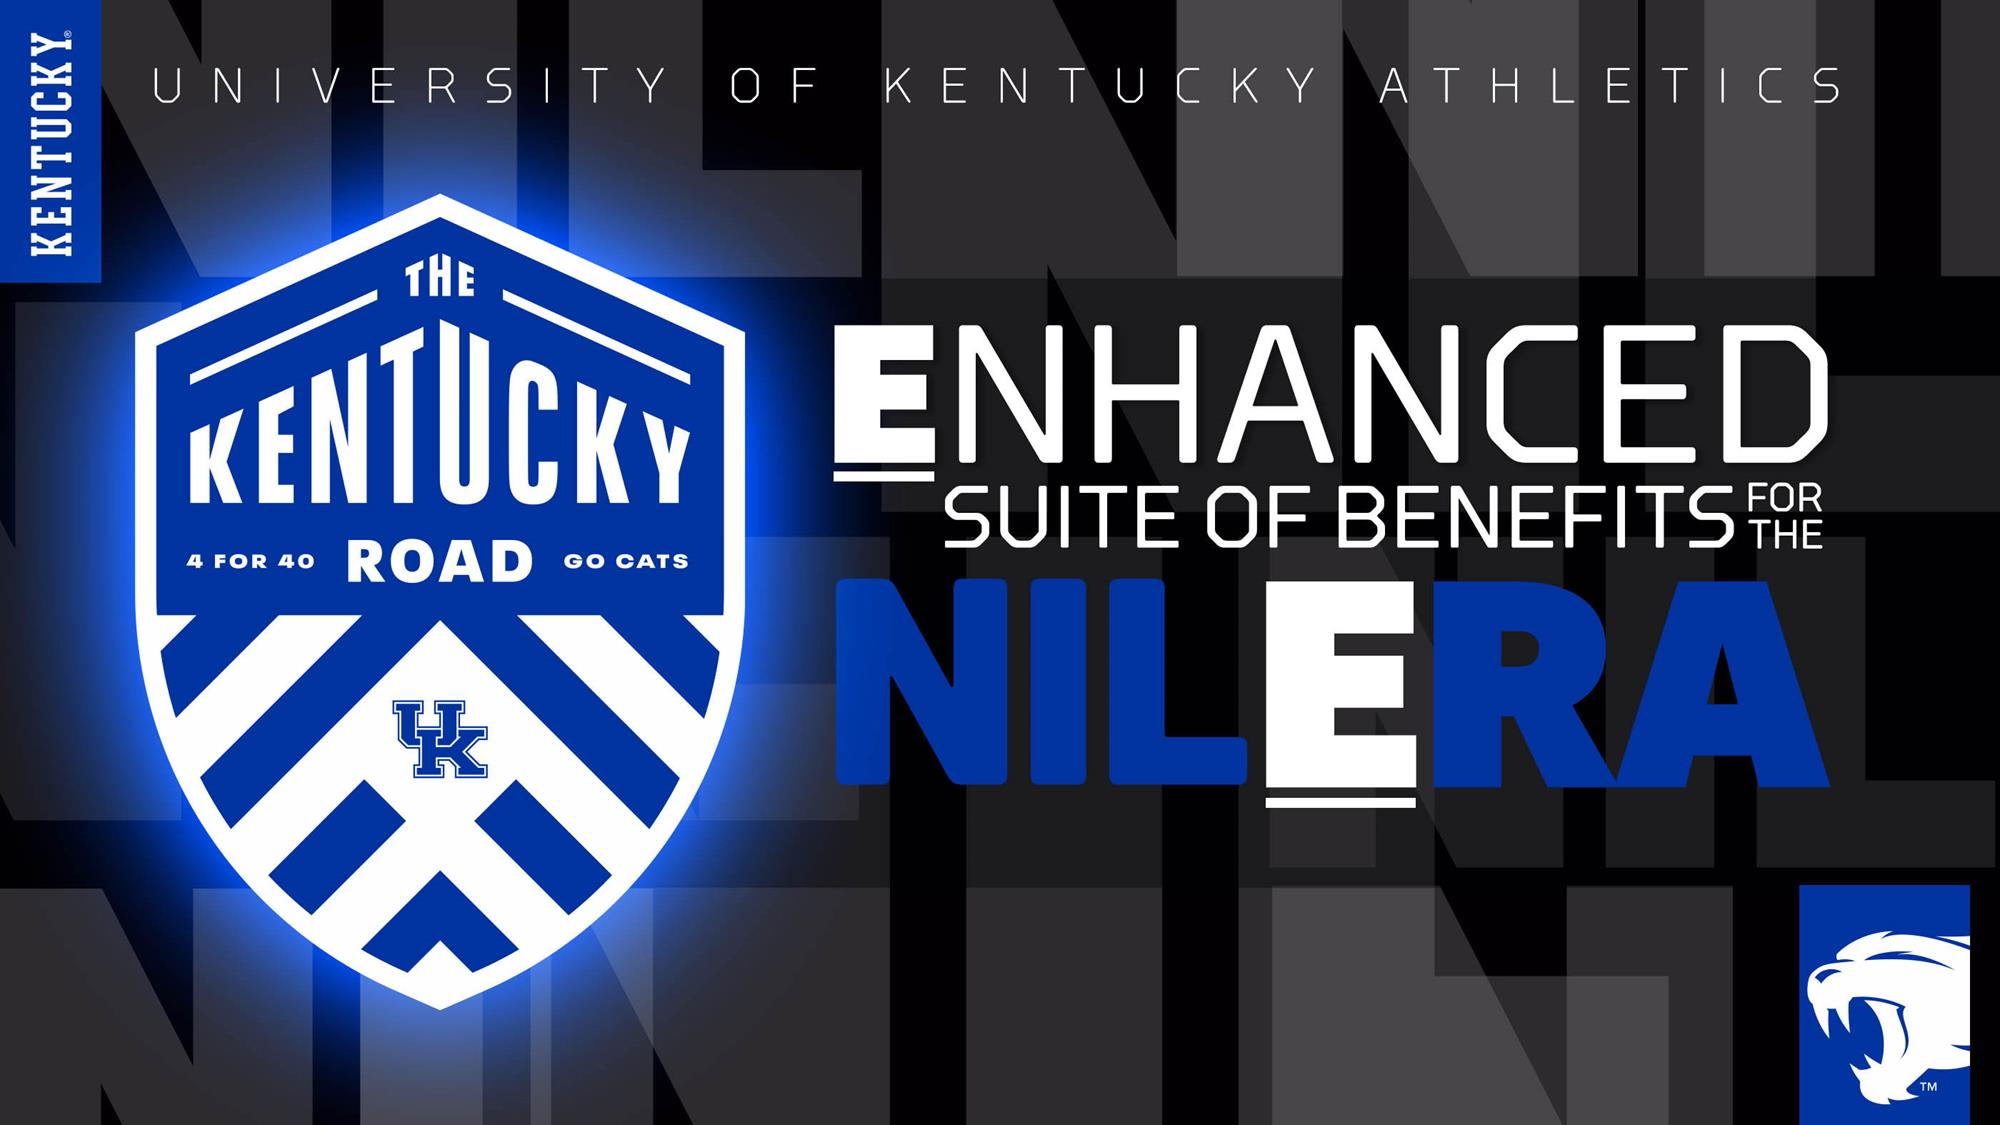 UK Athletics Affirms Commitment to Student-Athletes Through The Kentucky Road